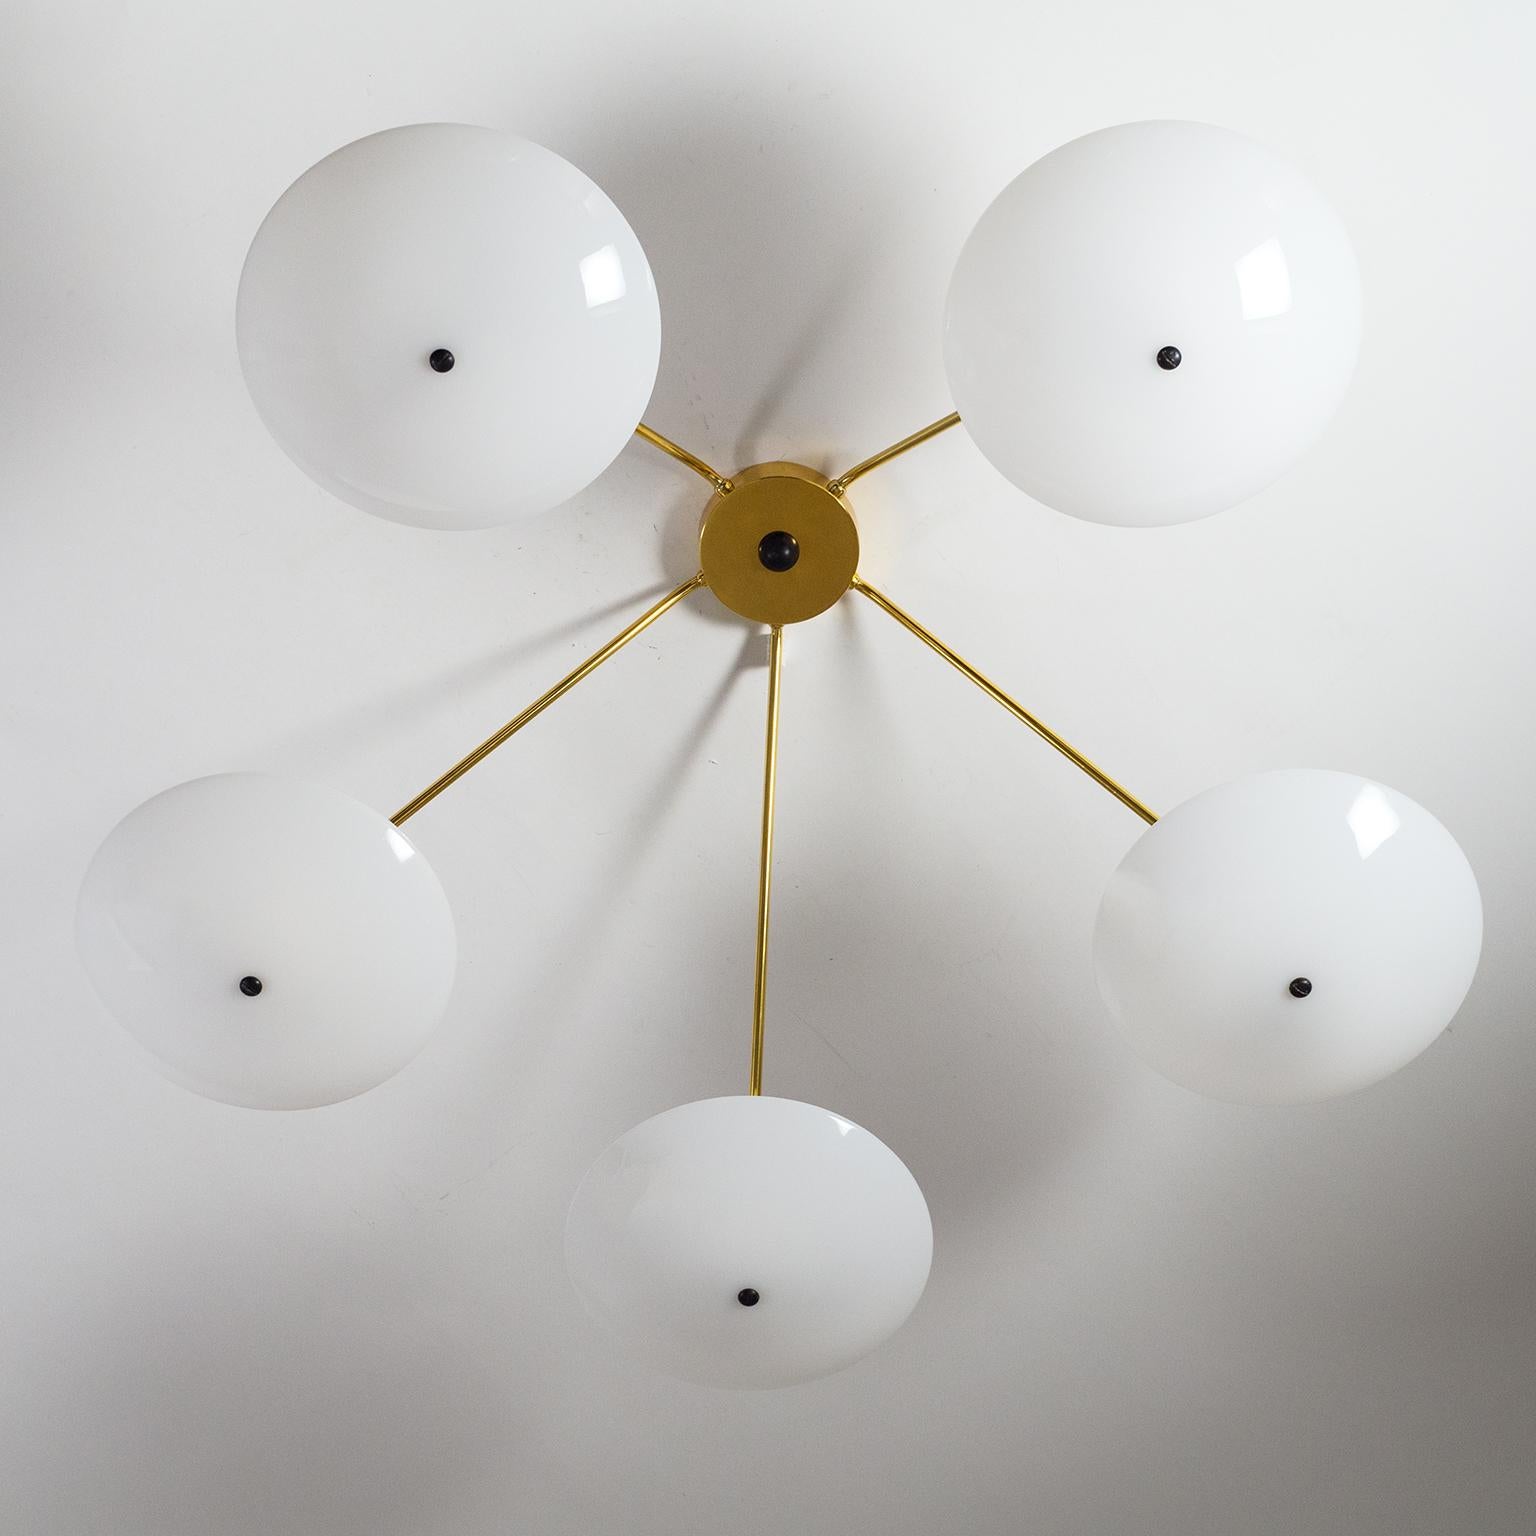 Brilliant modernist ceiling light from the 1950s. Five brass arms in varying lengths, each with an opaque acrylic diffuser, are mounted slightly asymmetrically on a minimalist brass ceiling unit. Despite their different lengths, the arms are angled